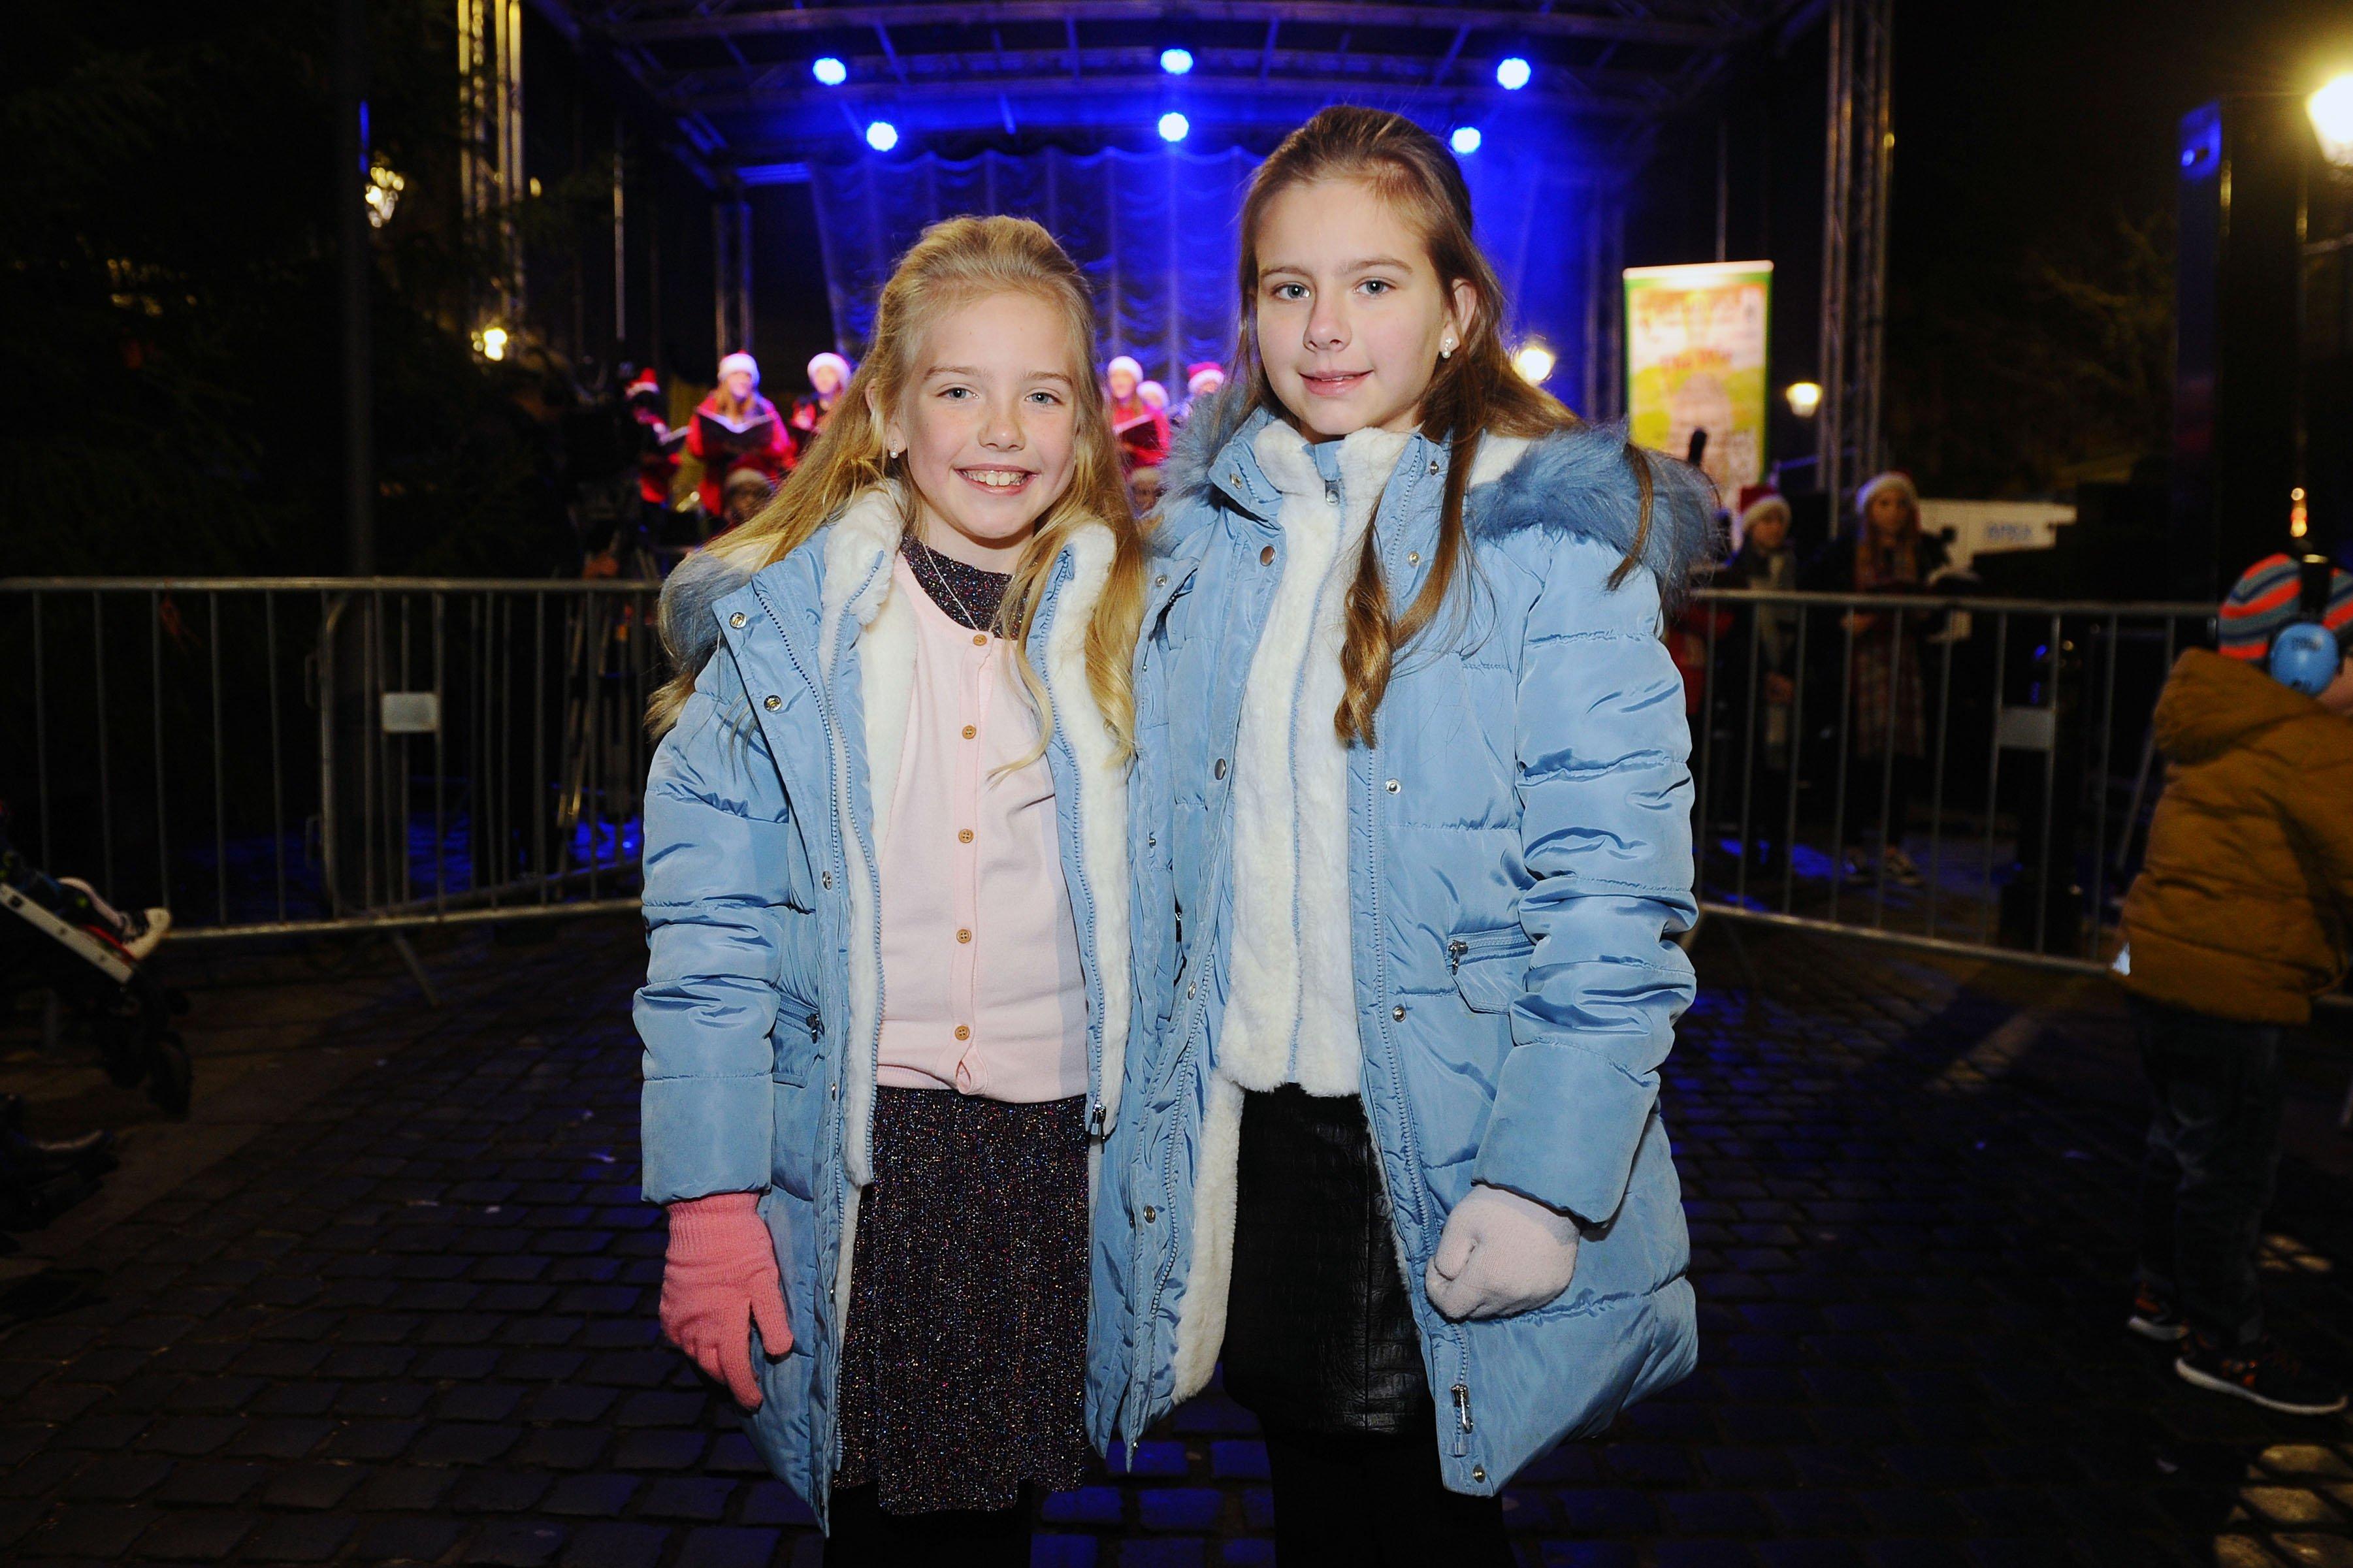 Falkirk Christmas lights switch on, Falkirk High Street, Sunday, November 17. Aimee Gilchrist (9) and Chloe Gilchrist (11) who switched on the lights. Picture by Michael Gillen.